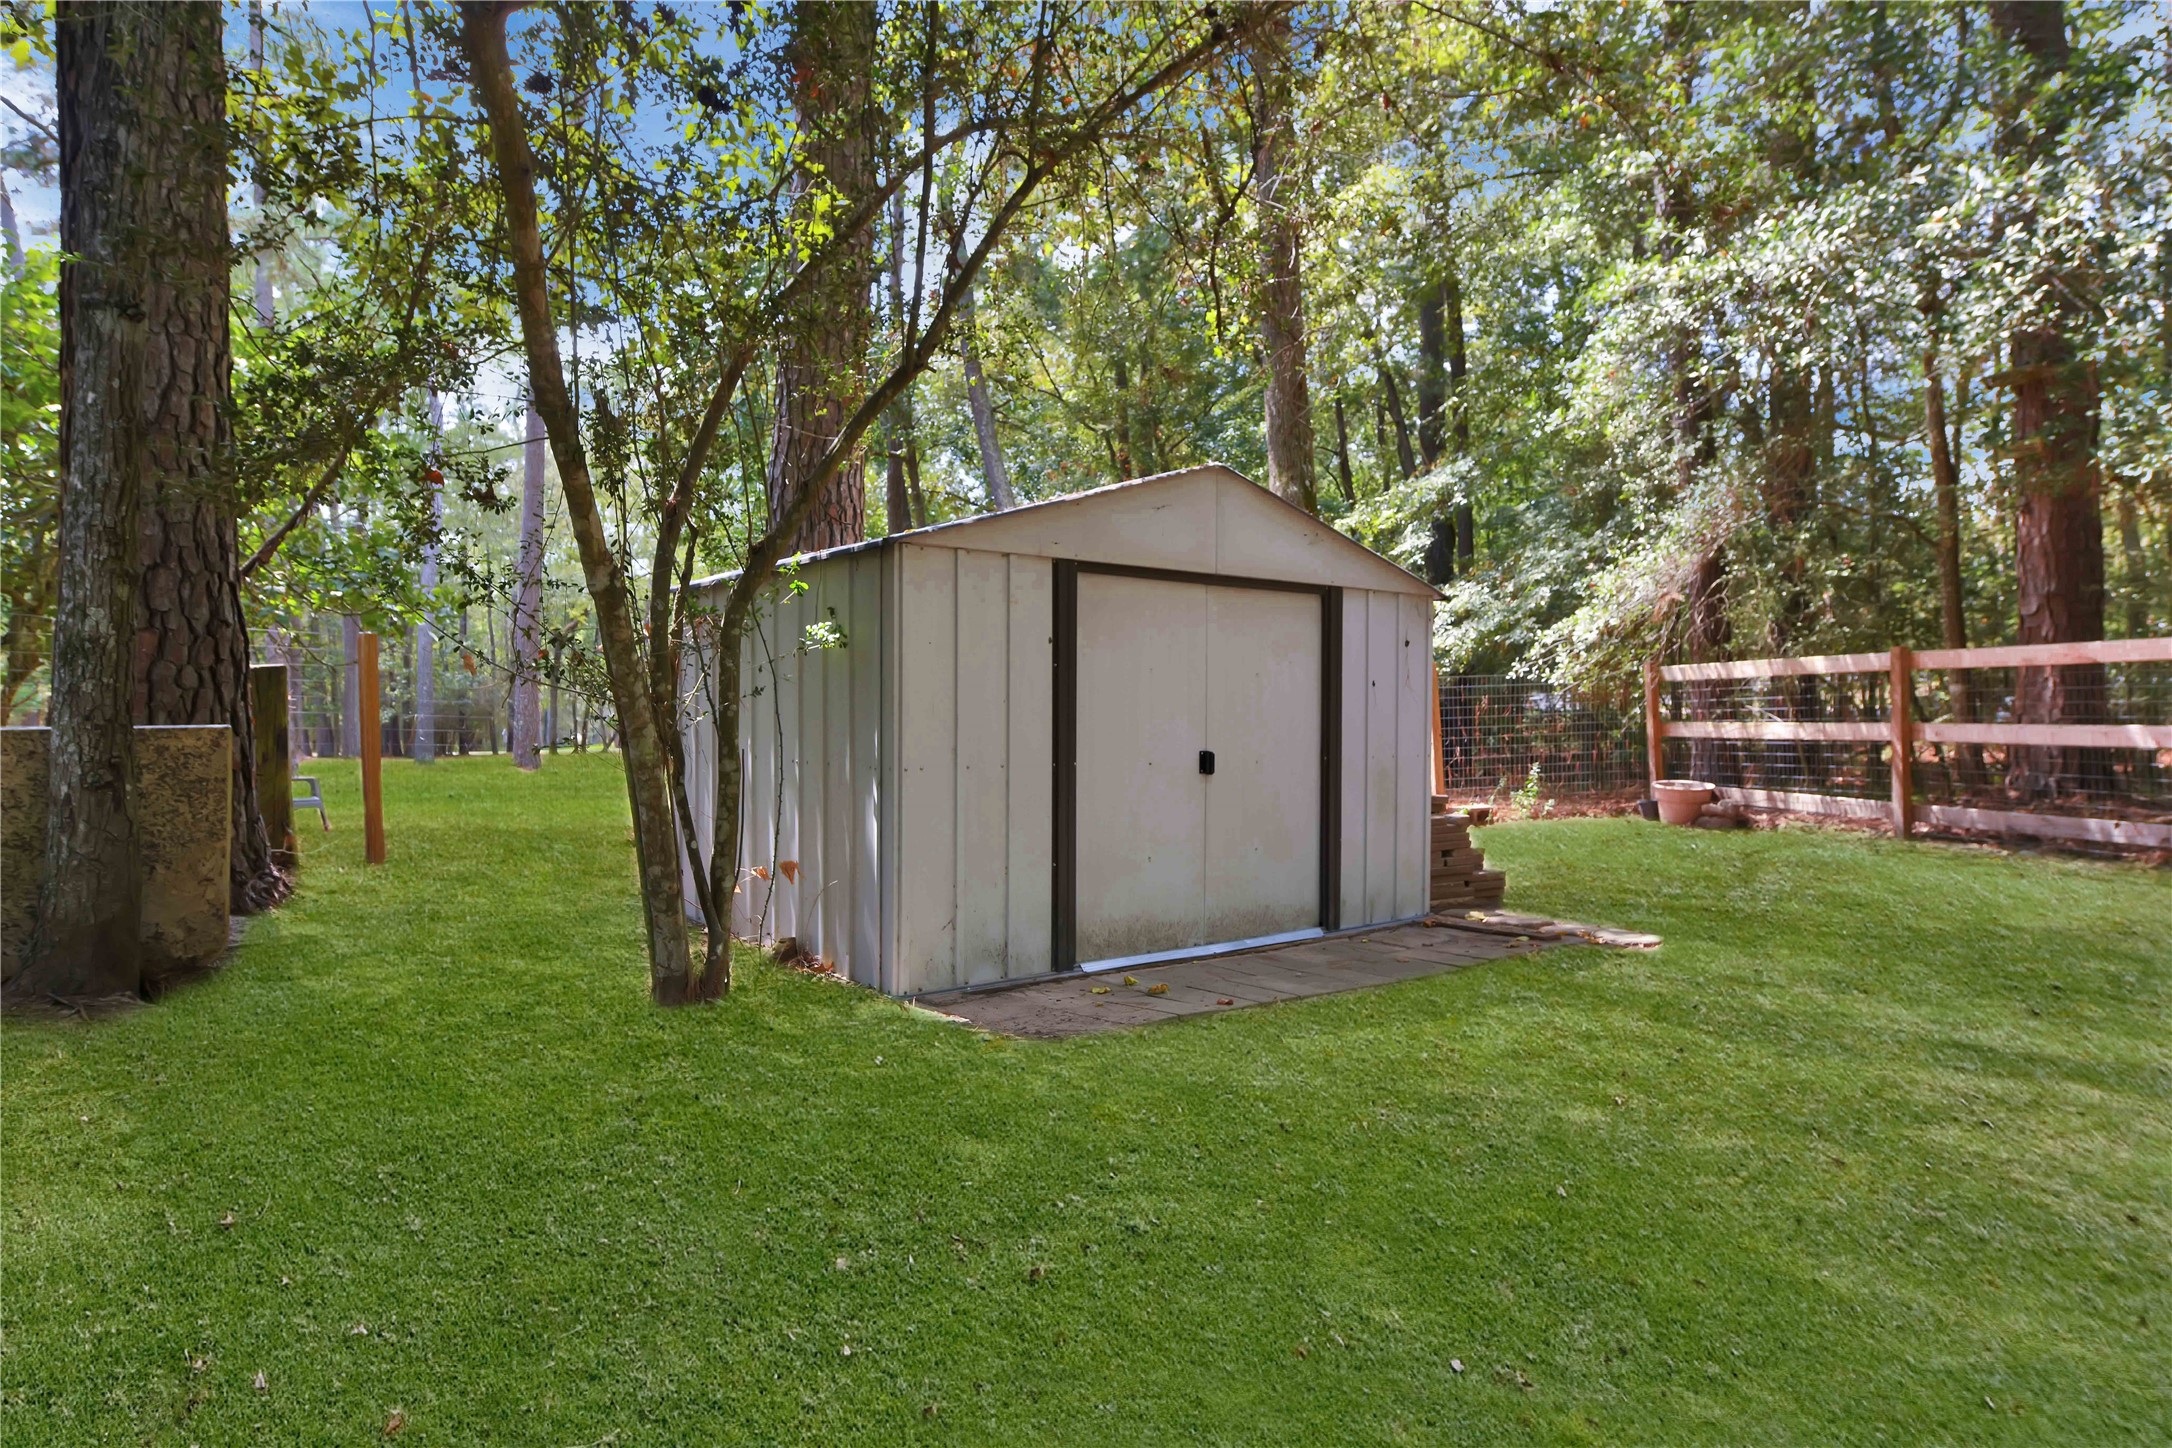 16603 Surrey Ln- A shed comes with the property for more storage.